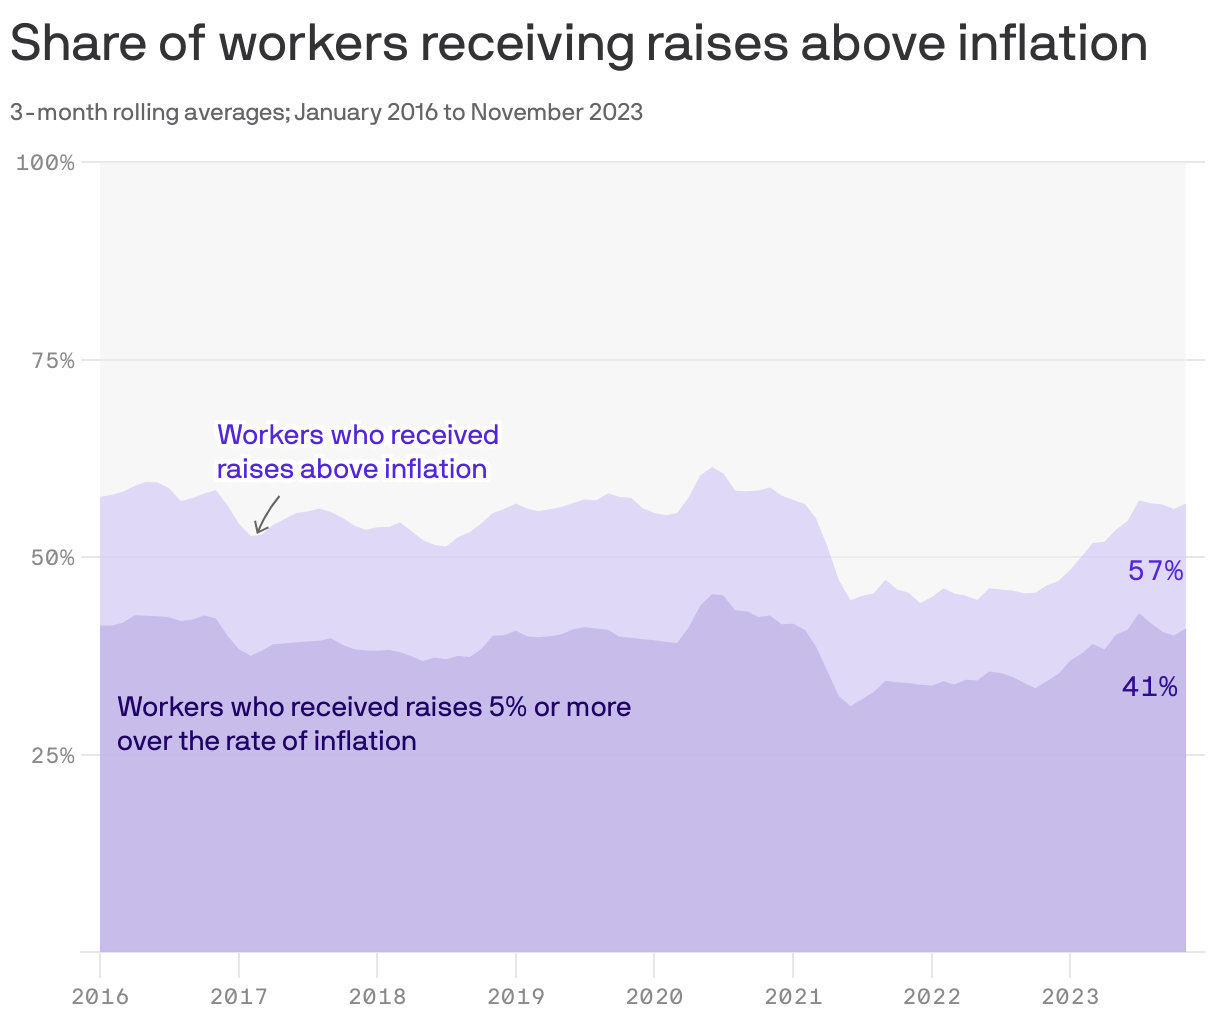 Share of workers receiving raises above inflation